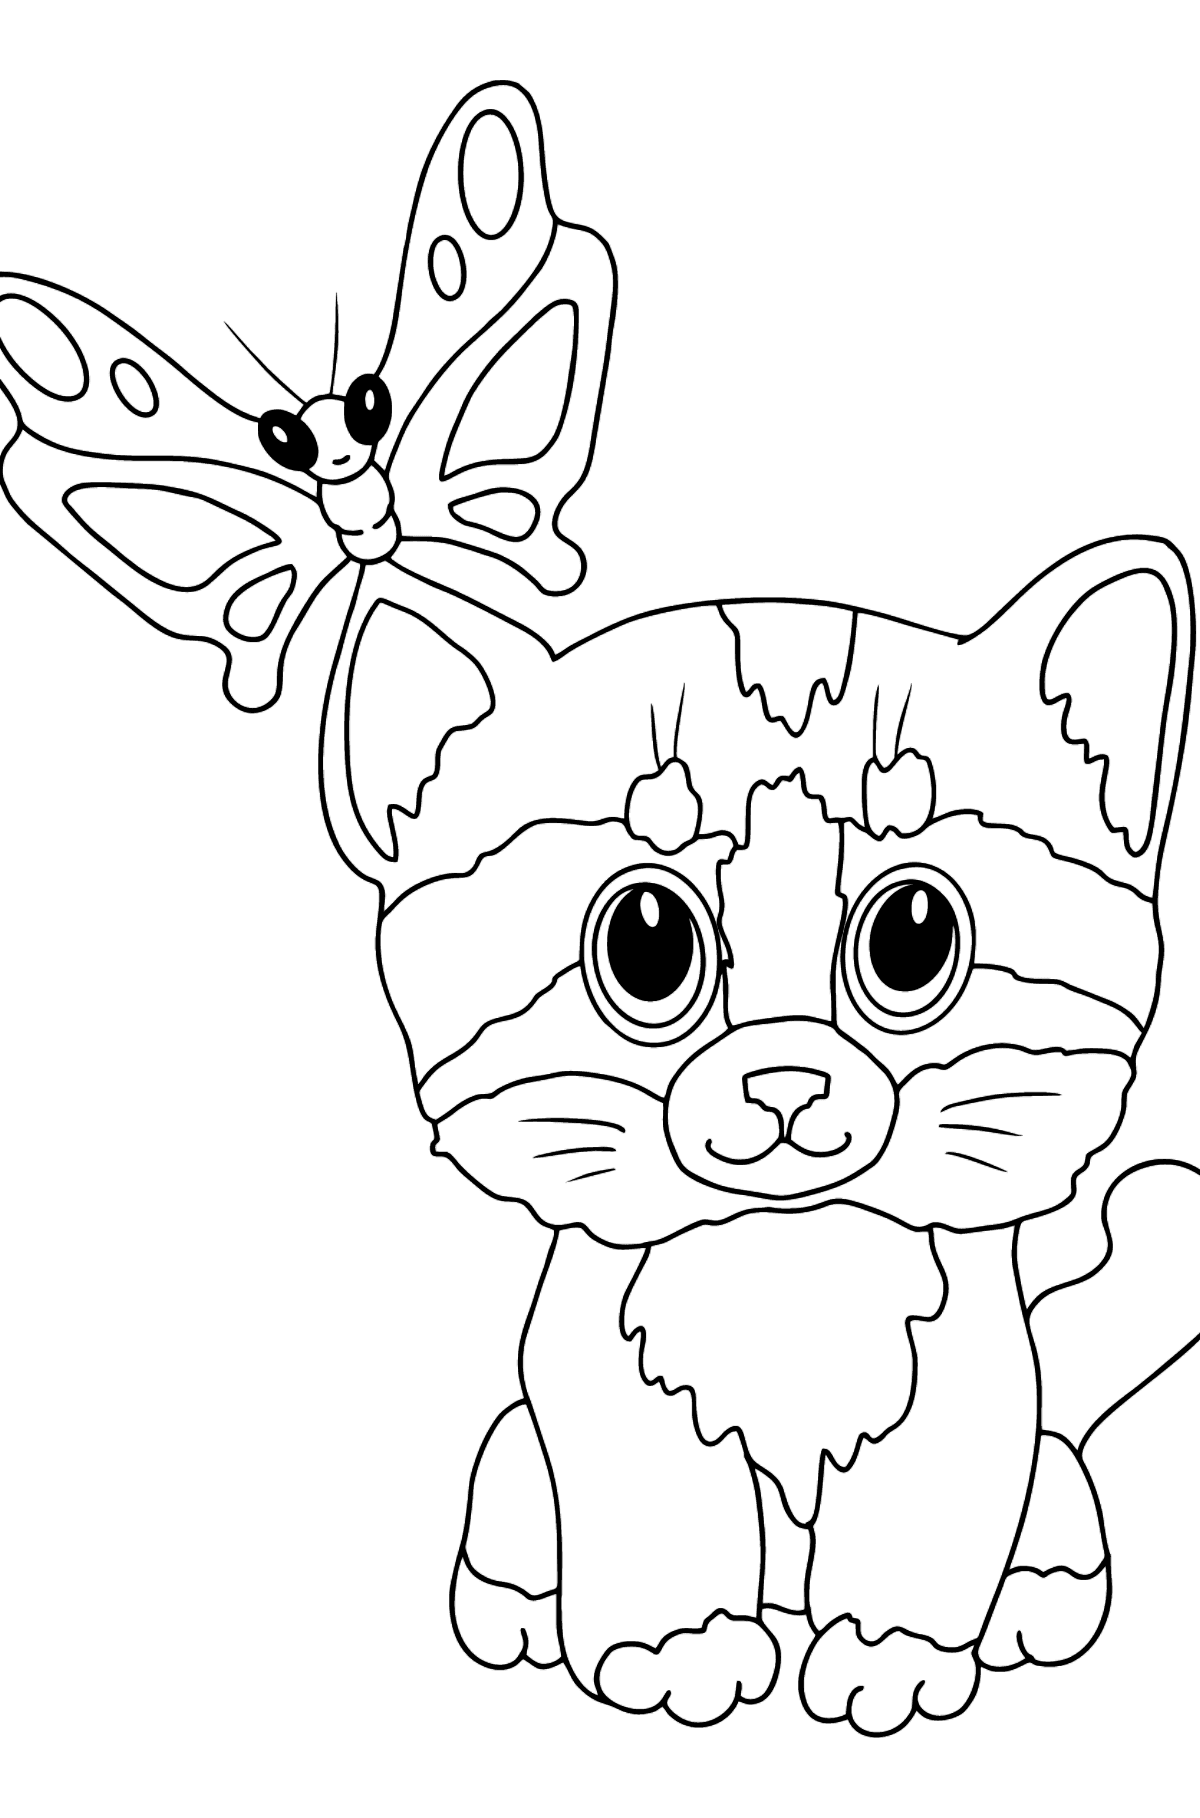 Kitten and Butterfly coloring page - Coloring Pages for Kids